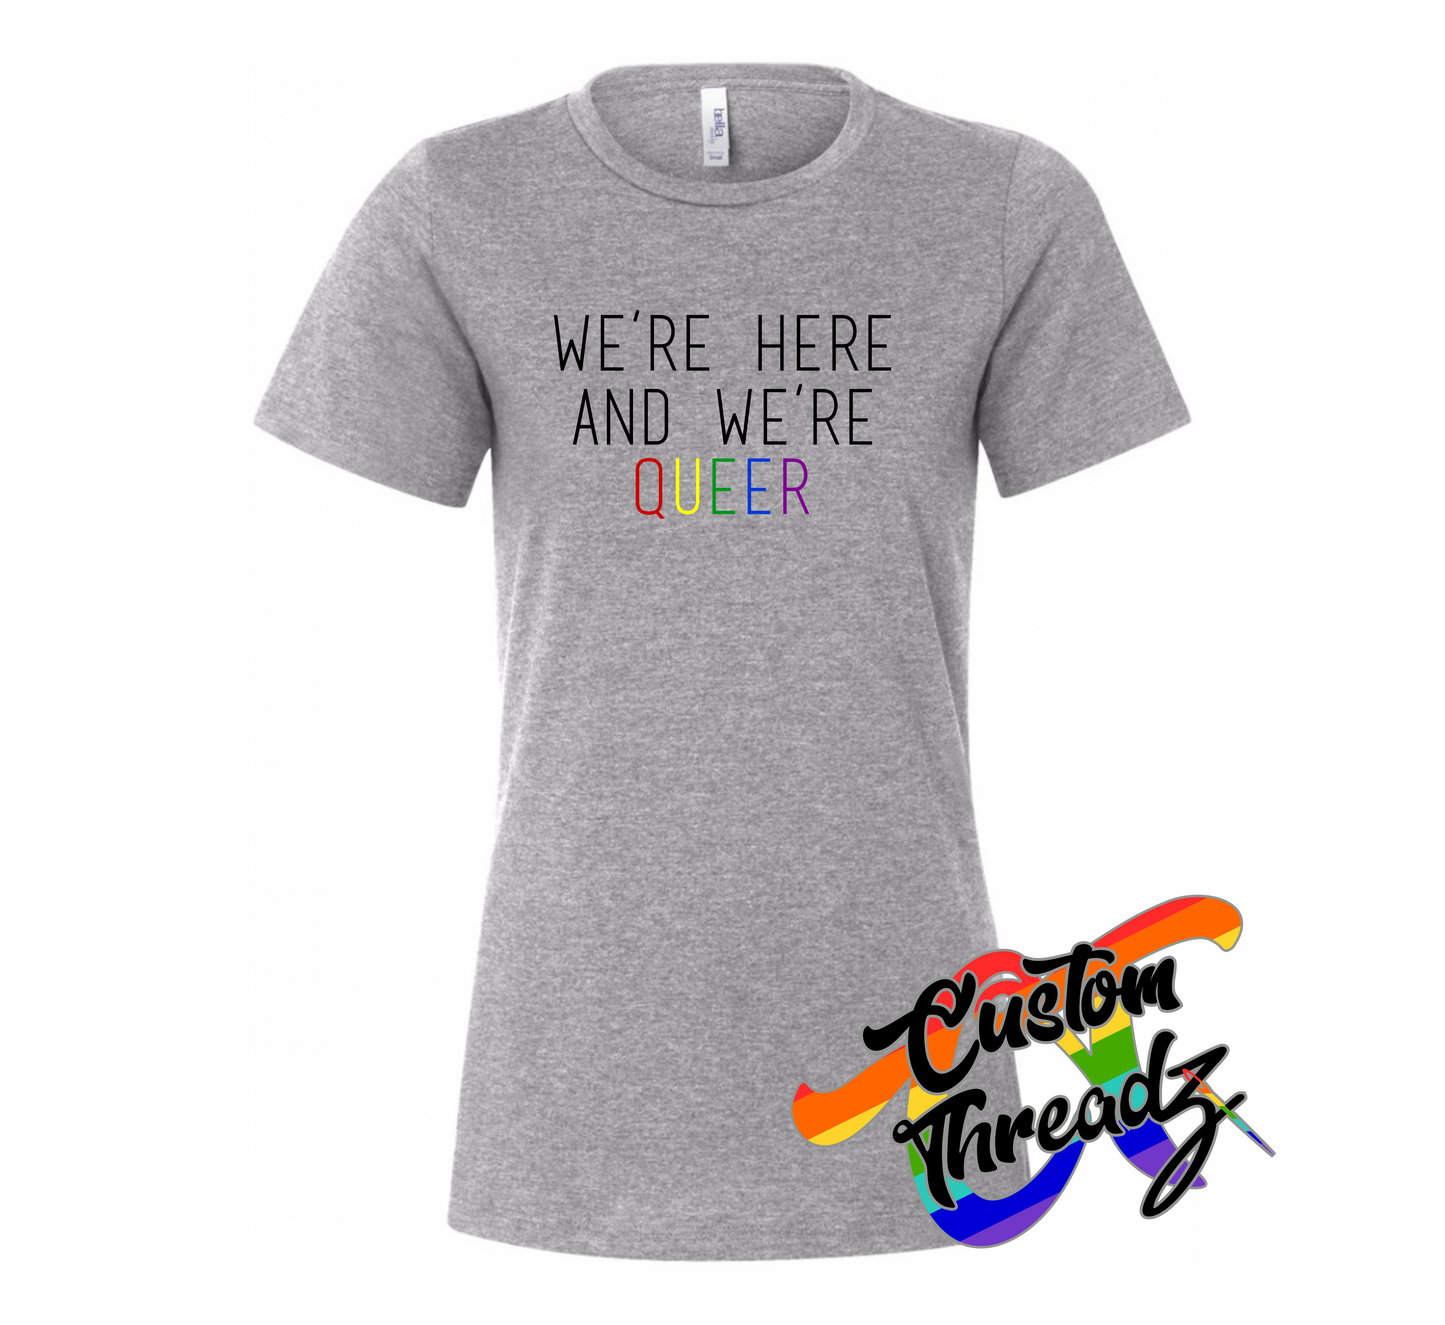 athletic heather grey womens tee with were here were queer rainbow DTG printed design